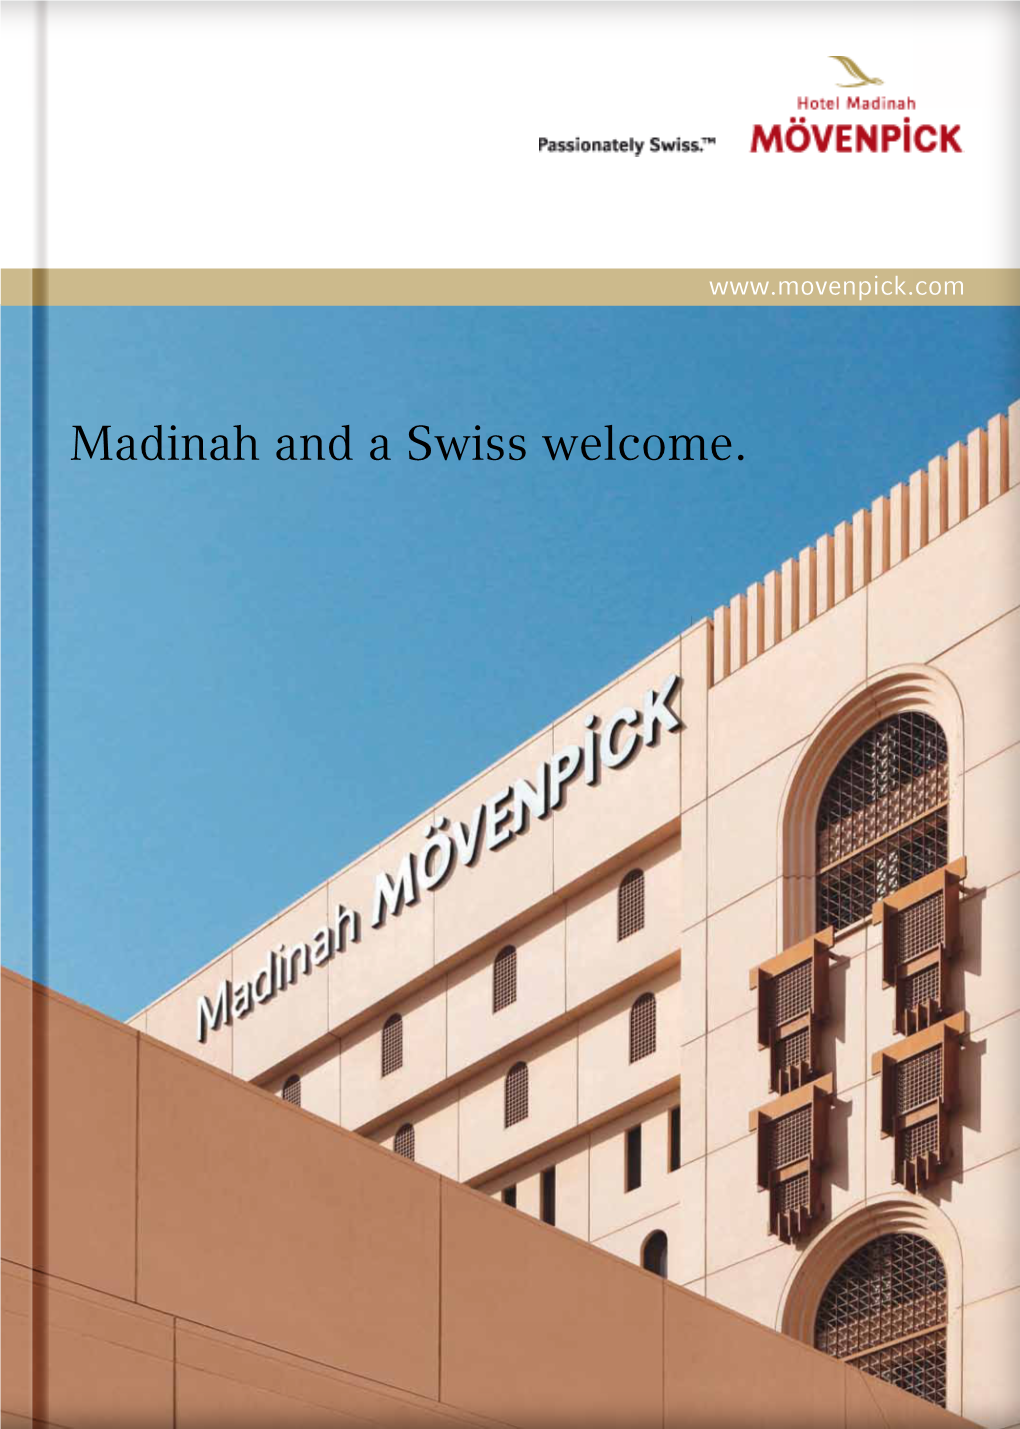 Madinah and a Swiss Welcome. Service and Passionately Swiss